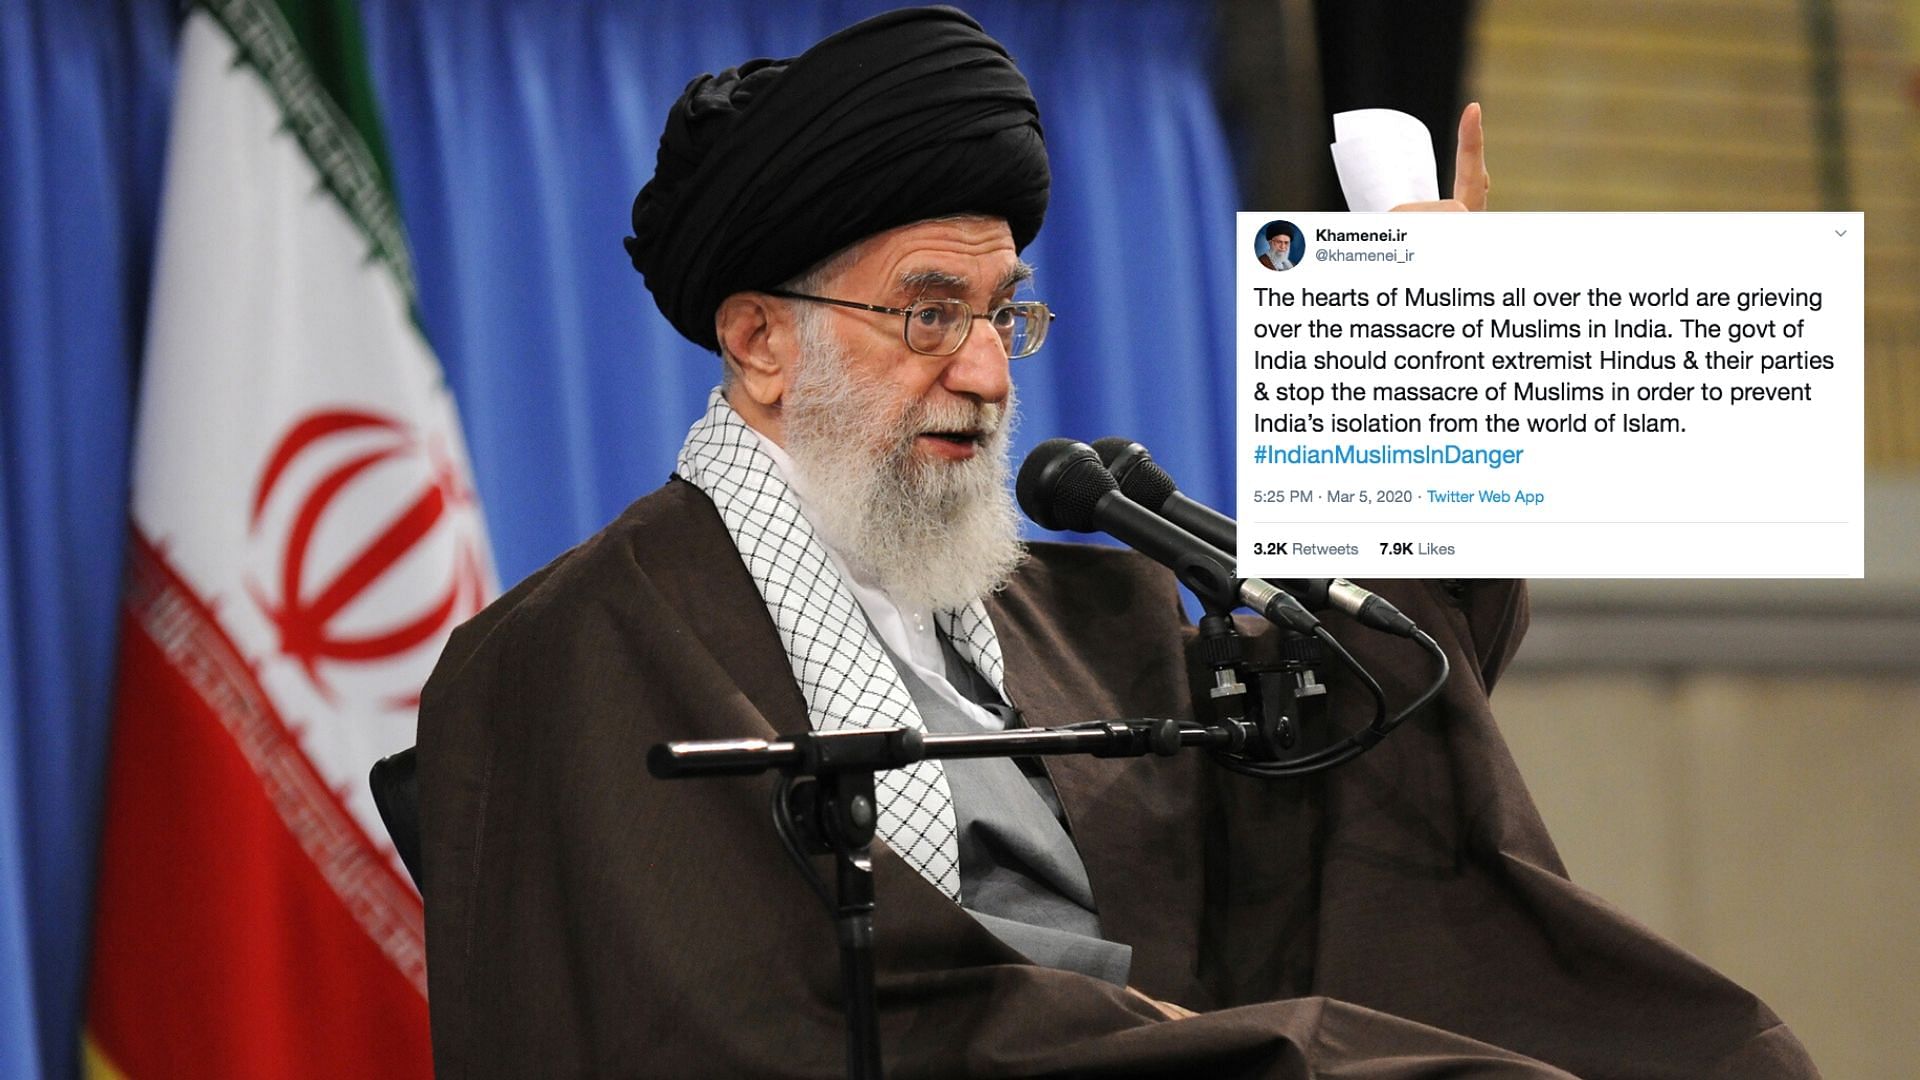 “The government of India should confront extremist Hindus and stop the massacre of Muslims,” Ayatollah Ali Khamenei said.